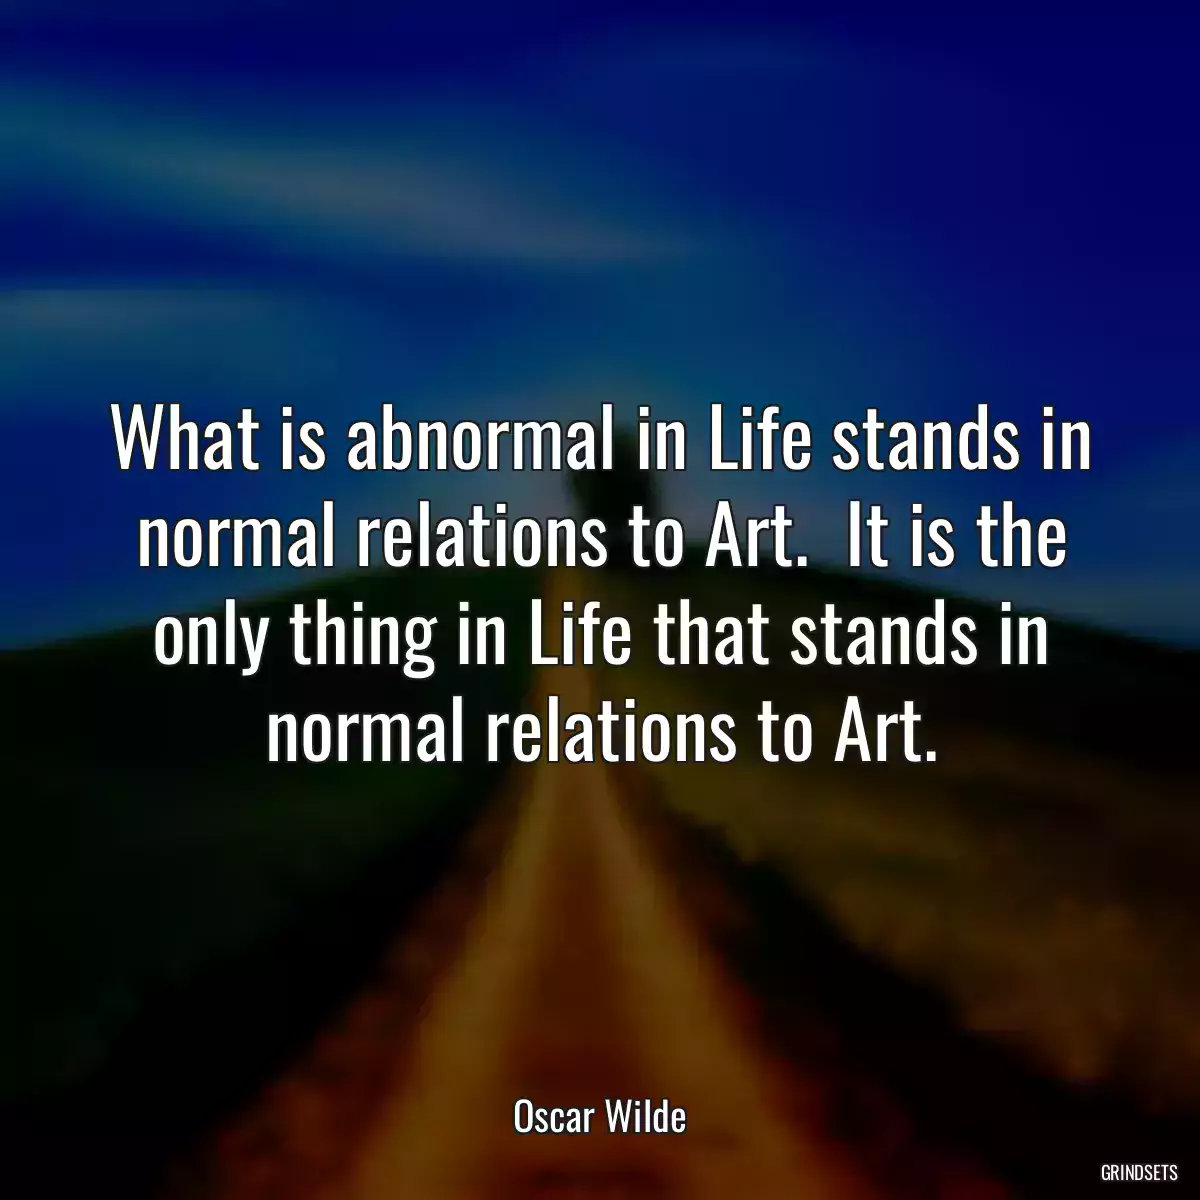 What is abnormal in Life stands in normal relations to Art.  It is the only thing in Life that stands in normal relations to Art.